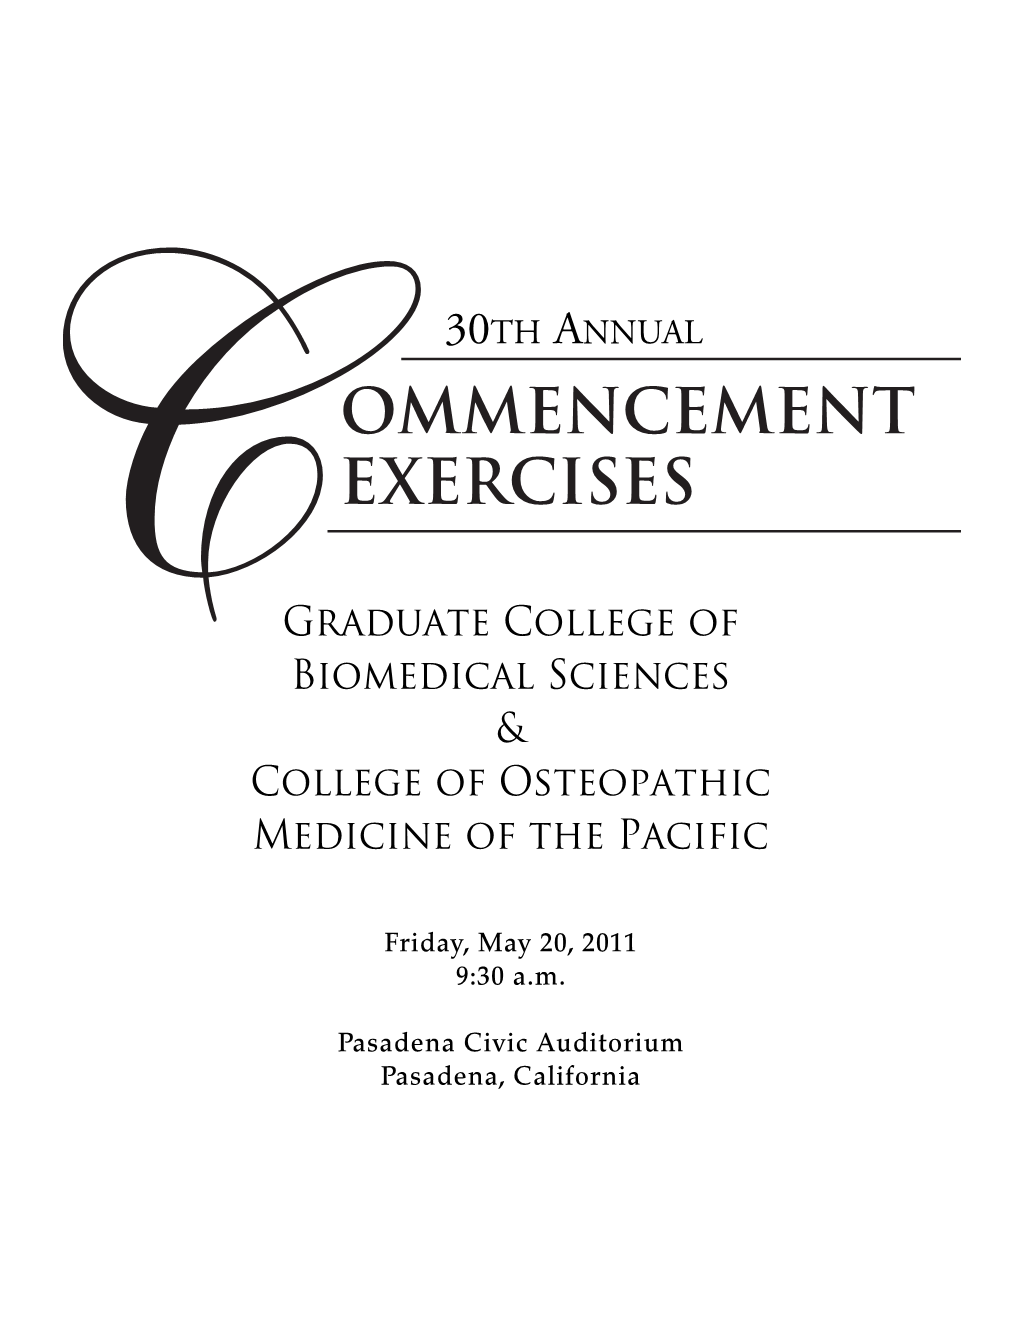 Graduate College of Biomedical Sciences & College of Osteopathic